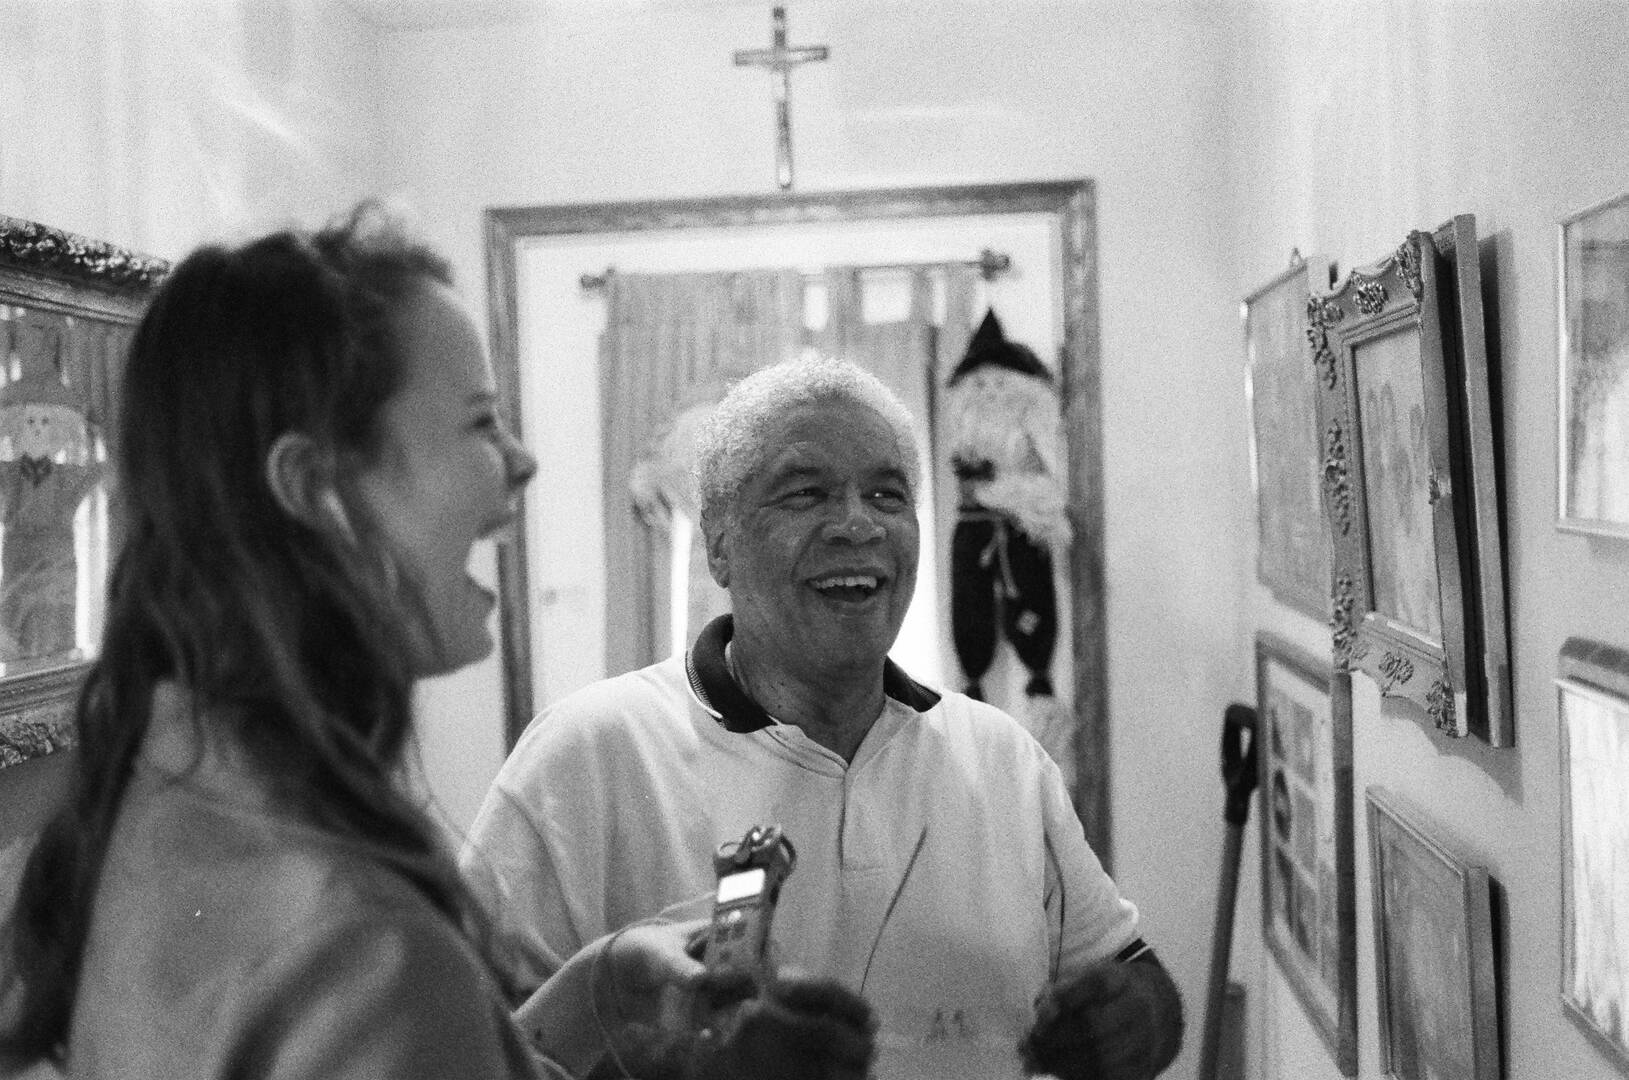 Phillip Clipps at his home with Erika Rasmussen of America